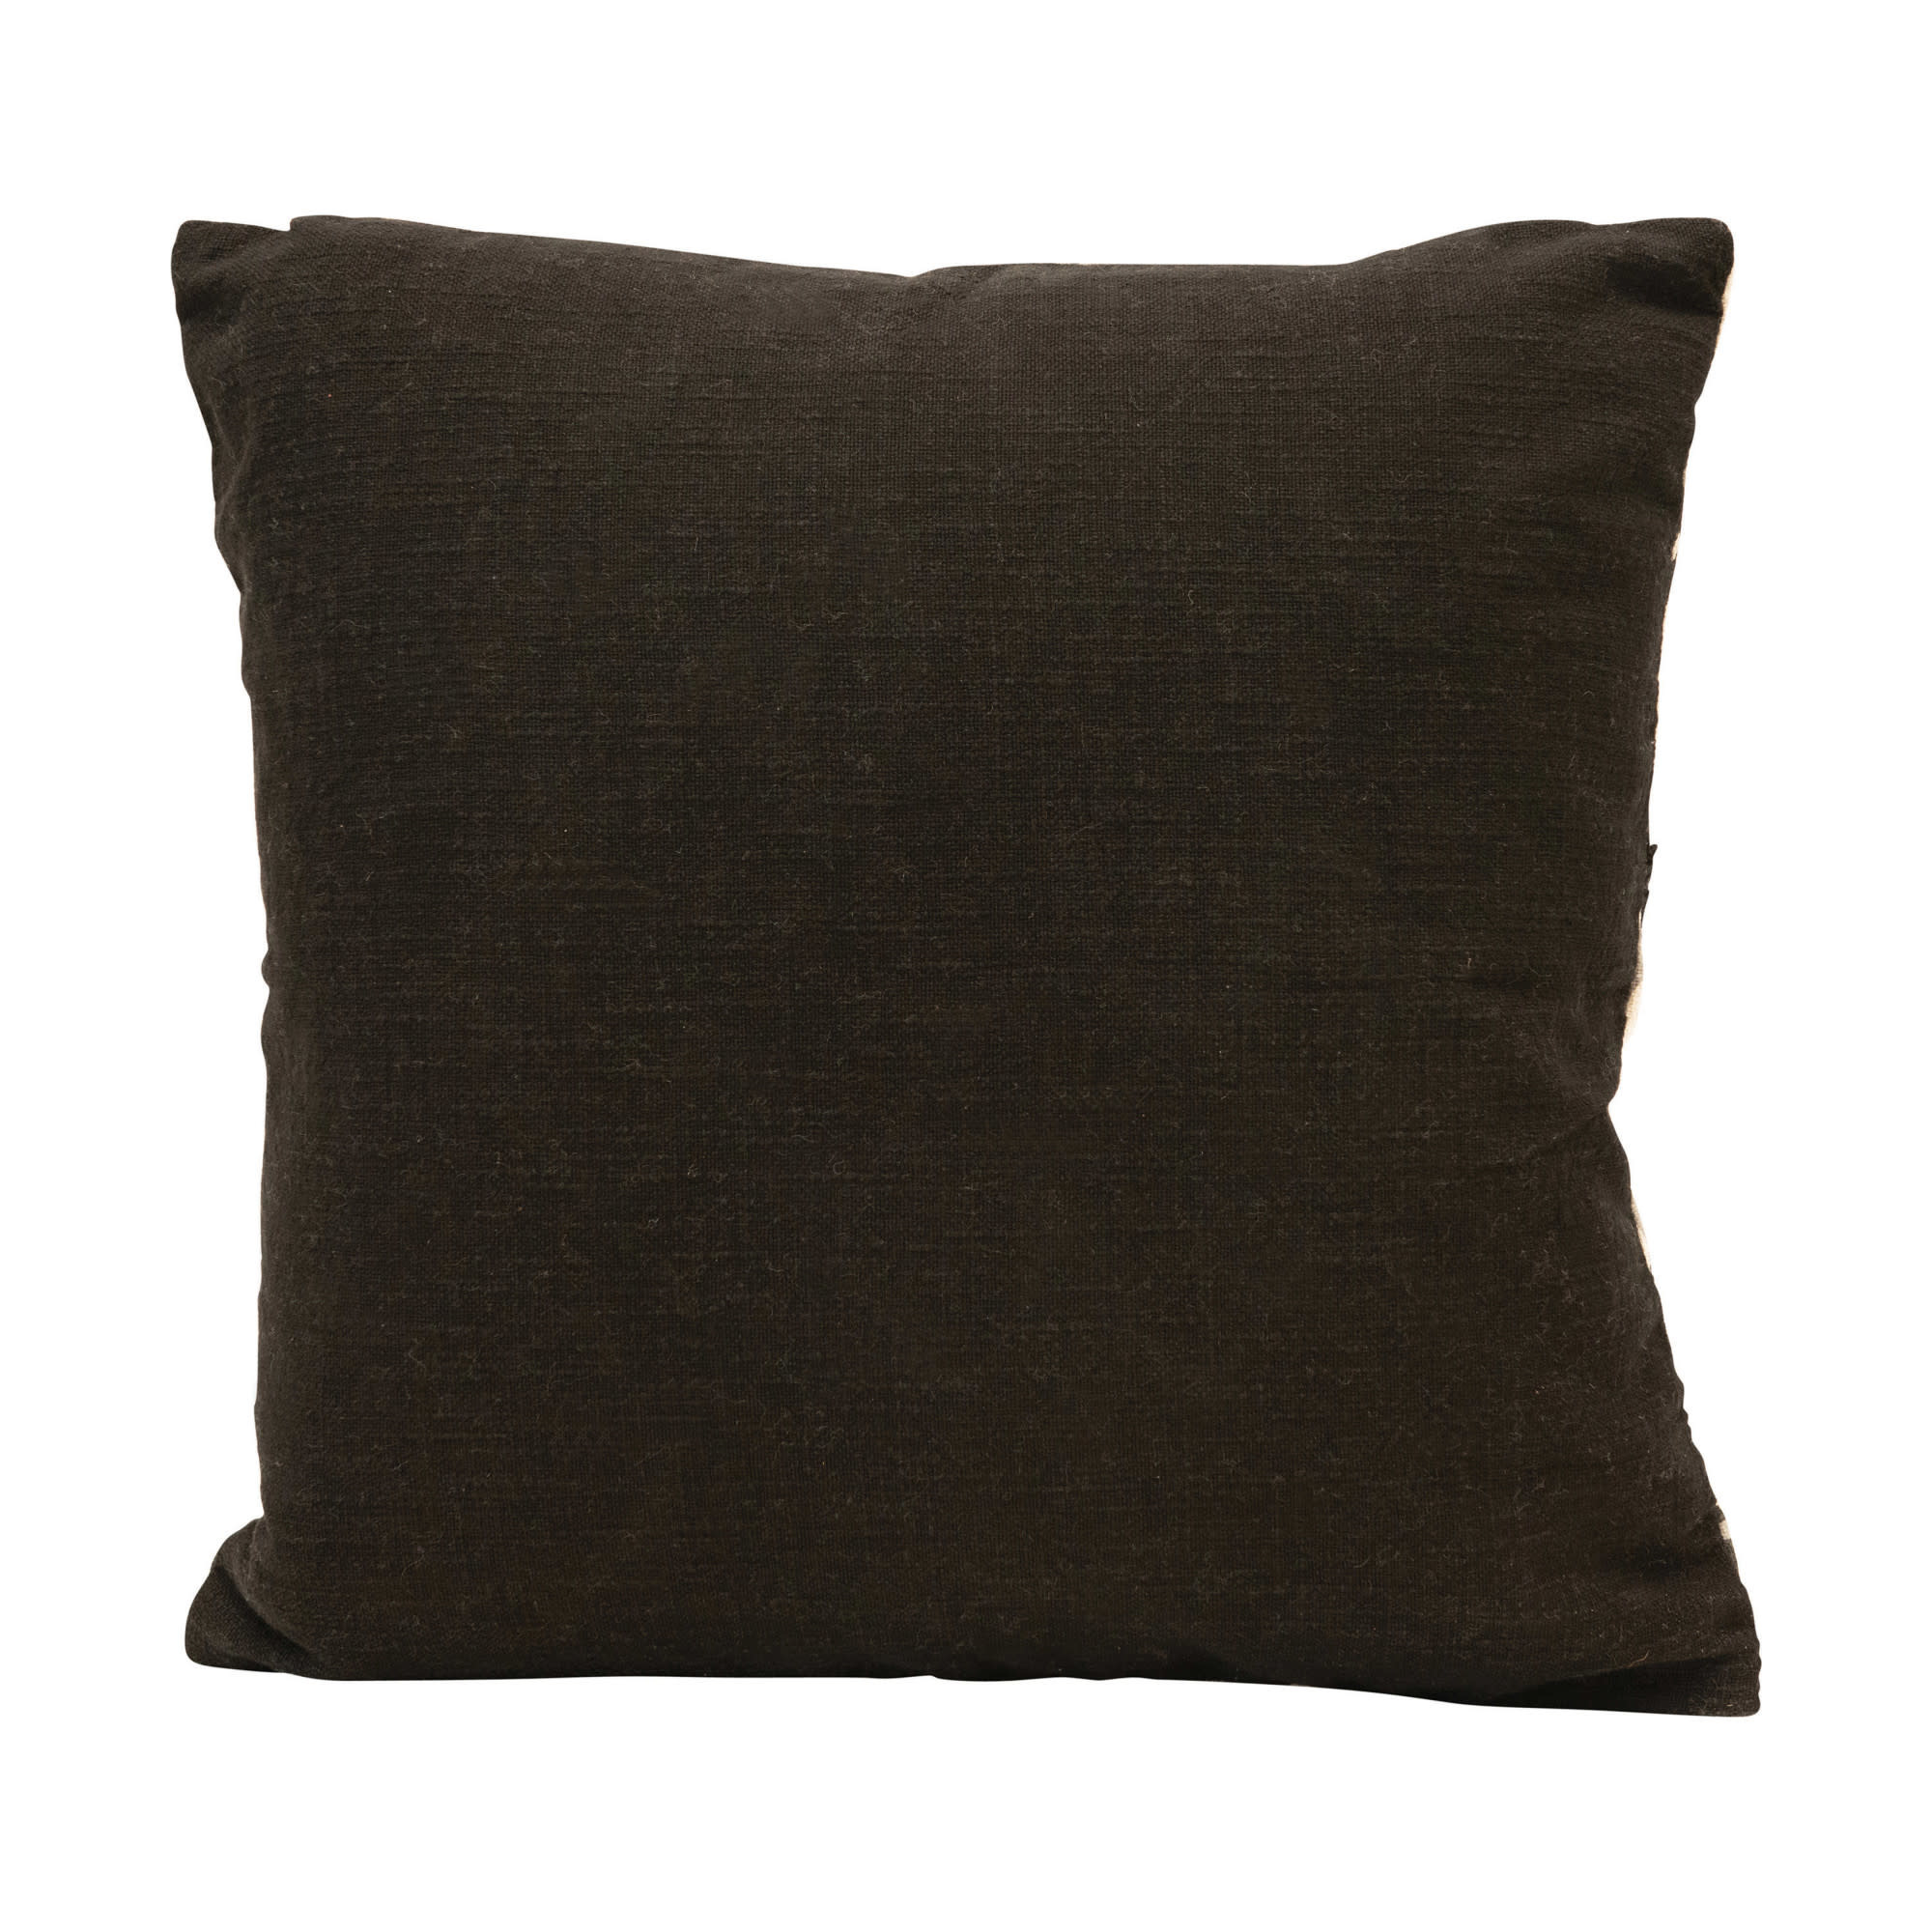 available at m. lynne designs Black Pom Scallop Pillow